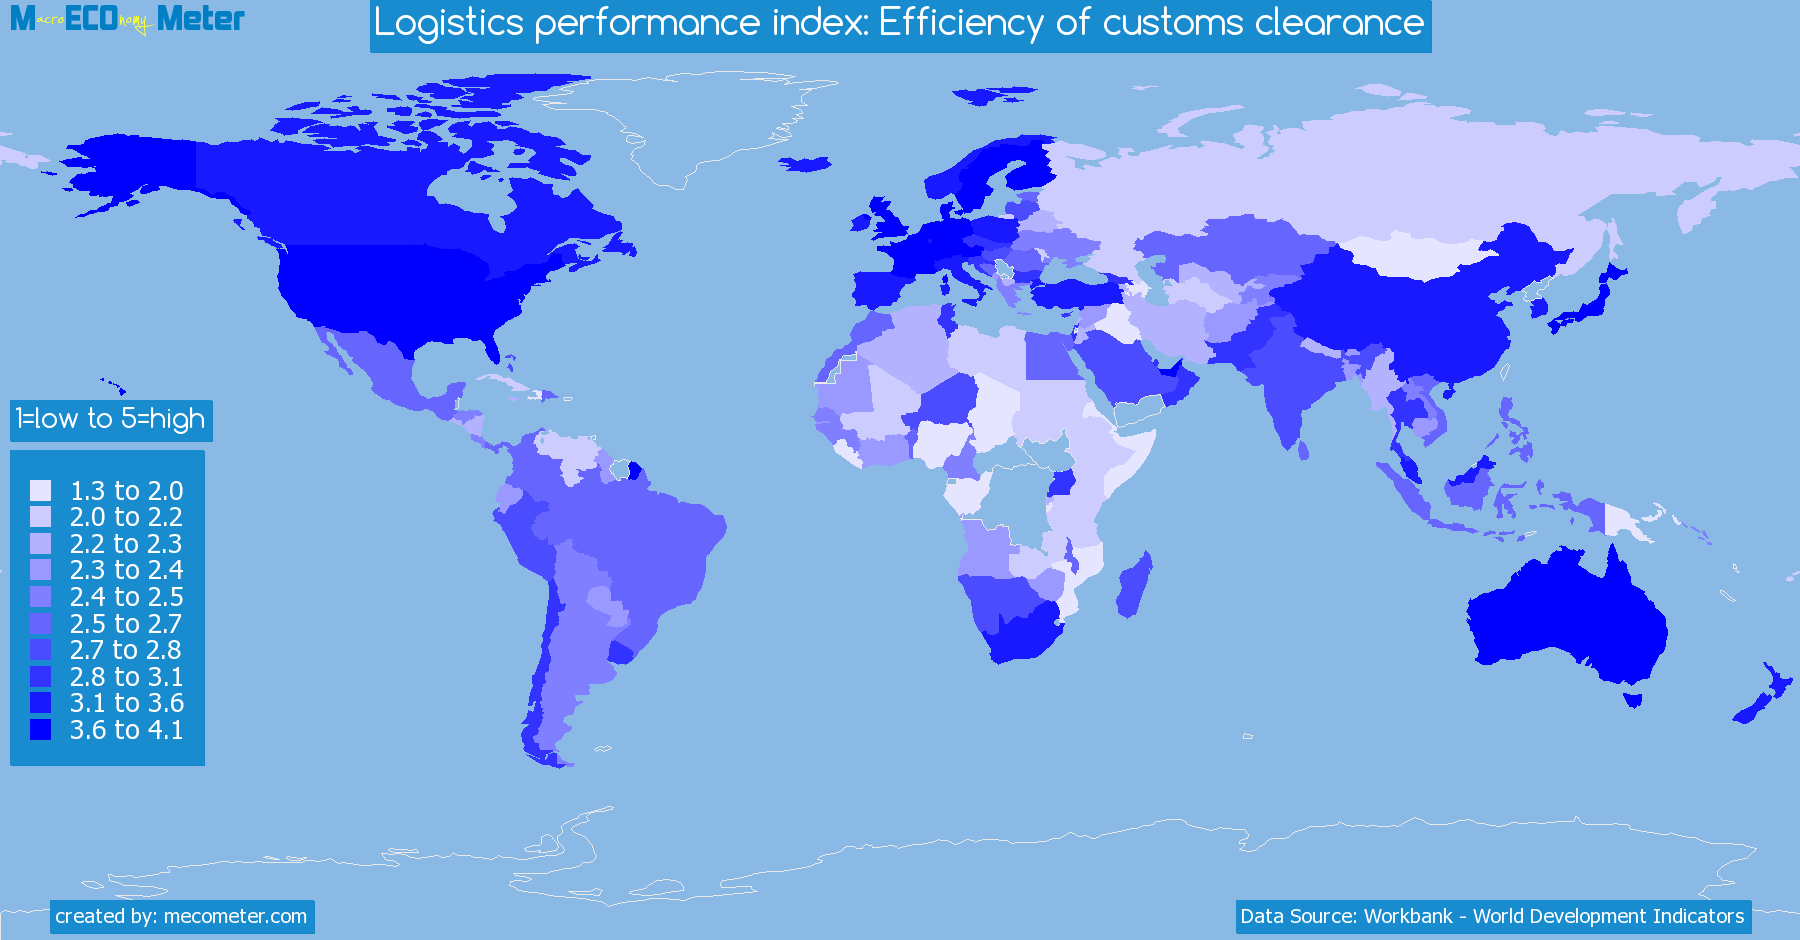 Worldmap of all countries colored to reflect the values of Logistics performance index: Efficiency of customs clearance